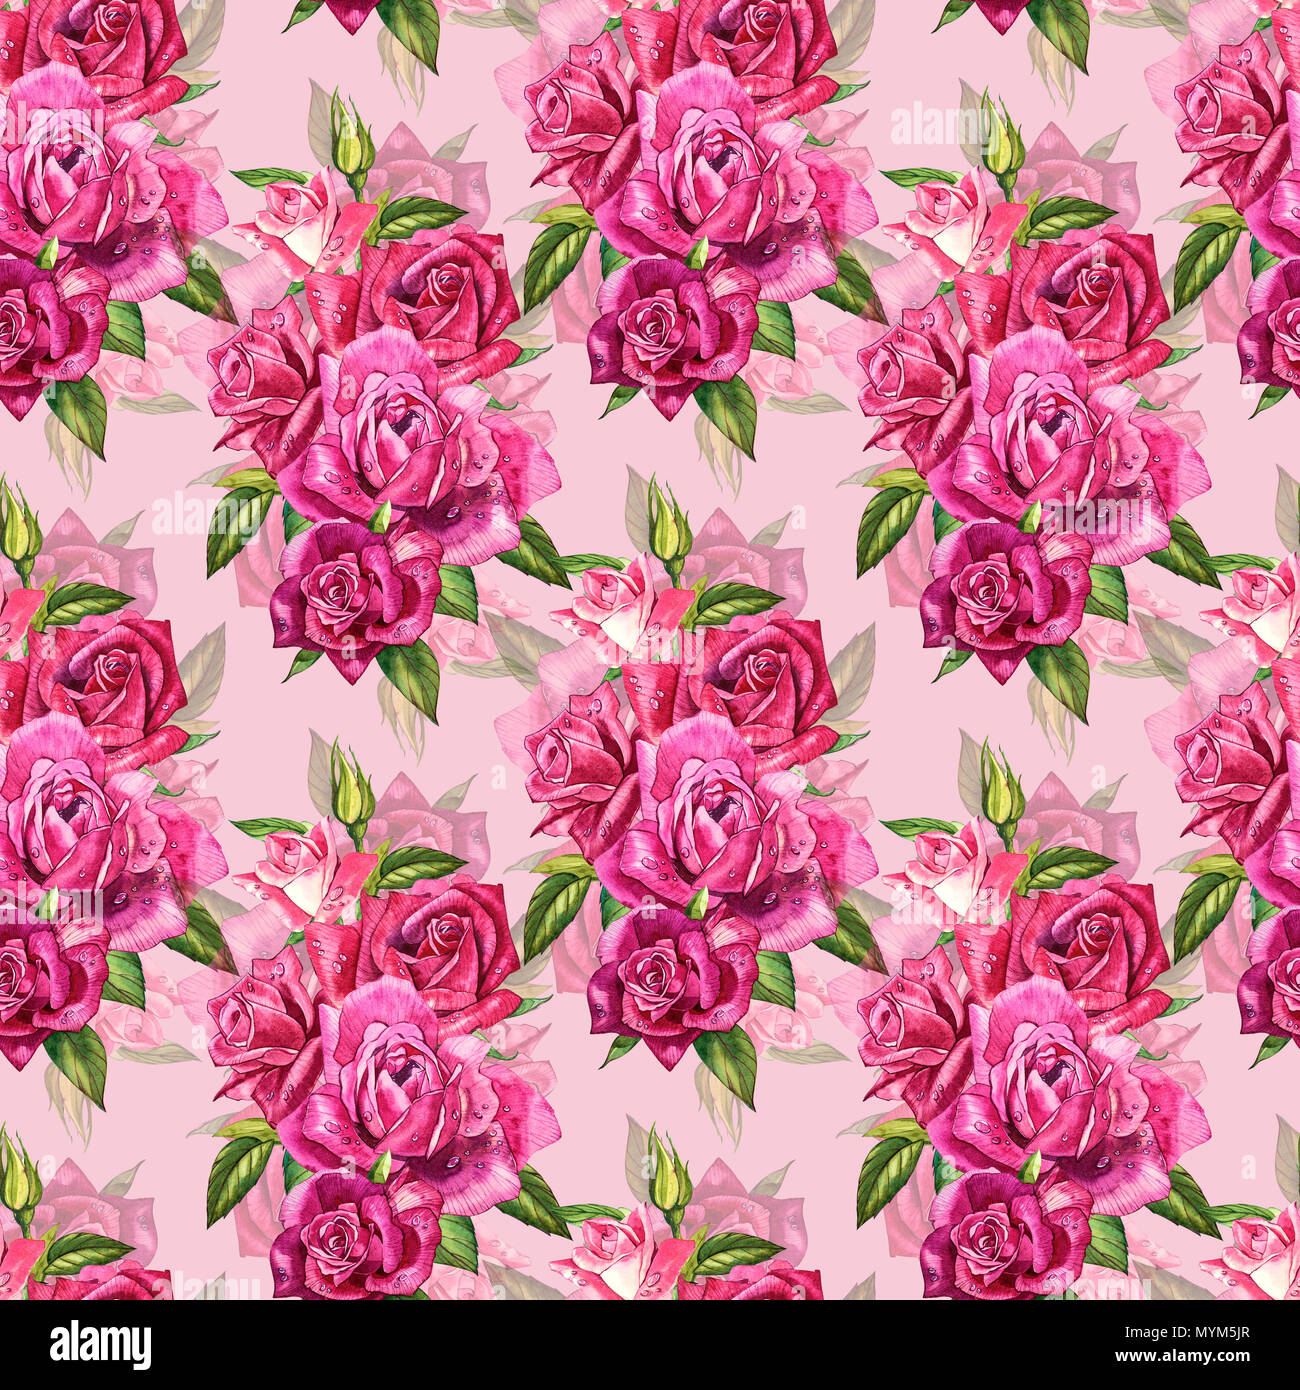 Natural pink roses background. Seamless pattern of red and pink roses,  watercolor illustration Stock Photo - Alamy